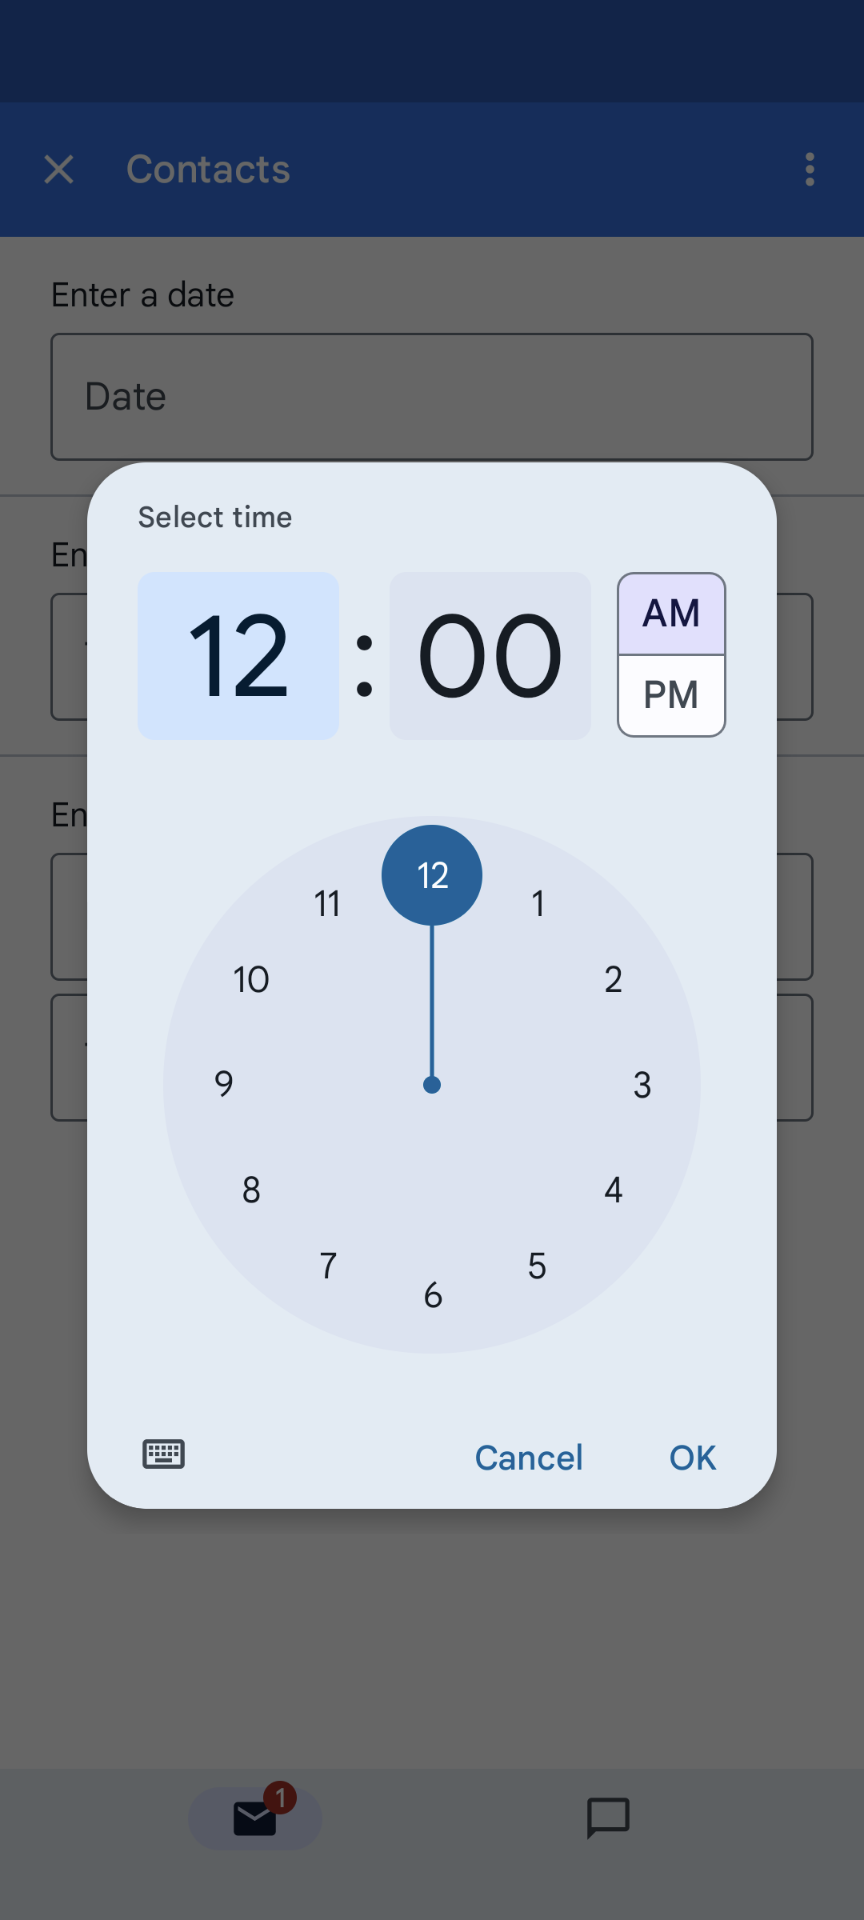 mobile time picker selection example